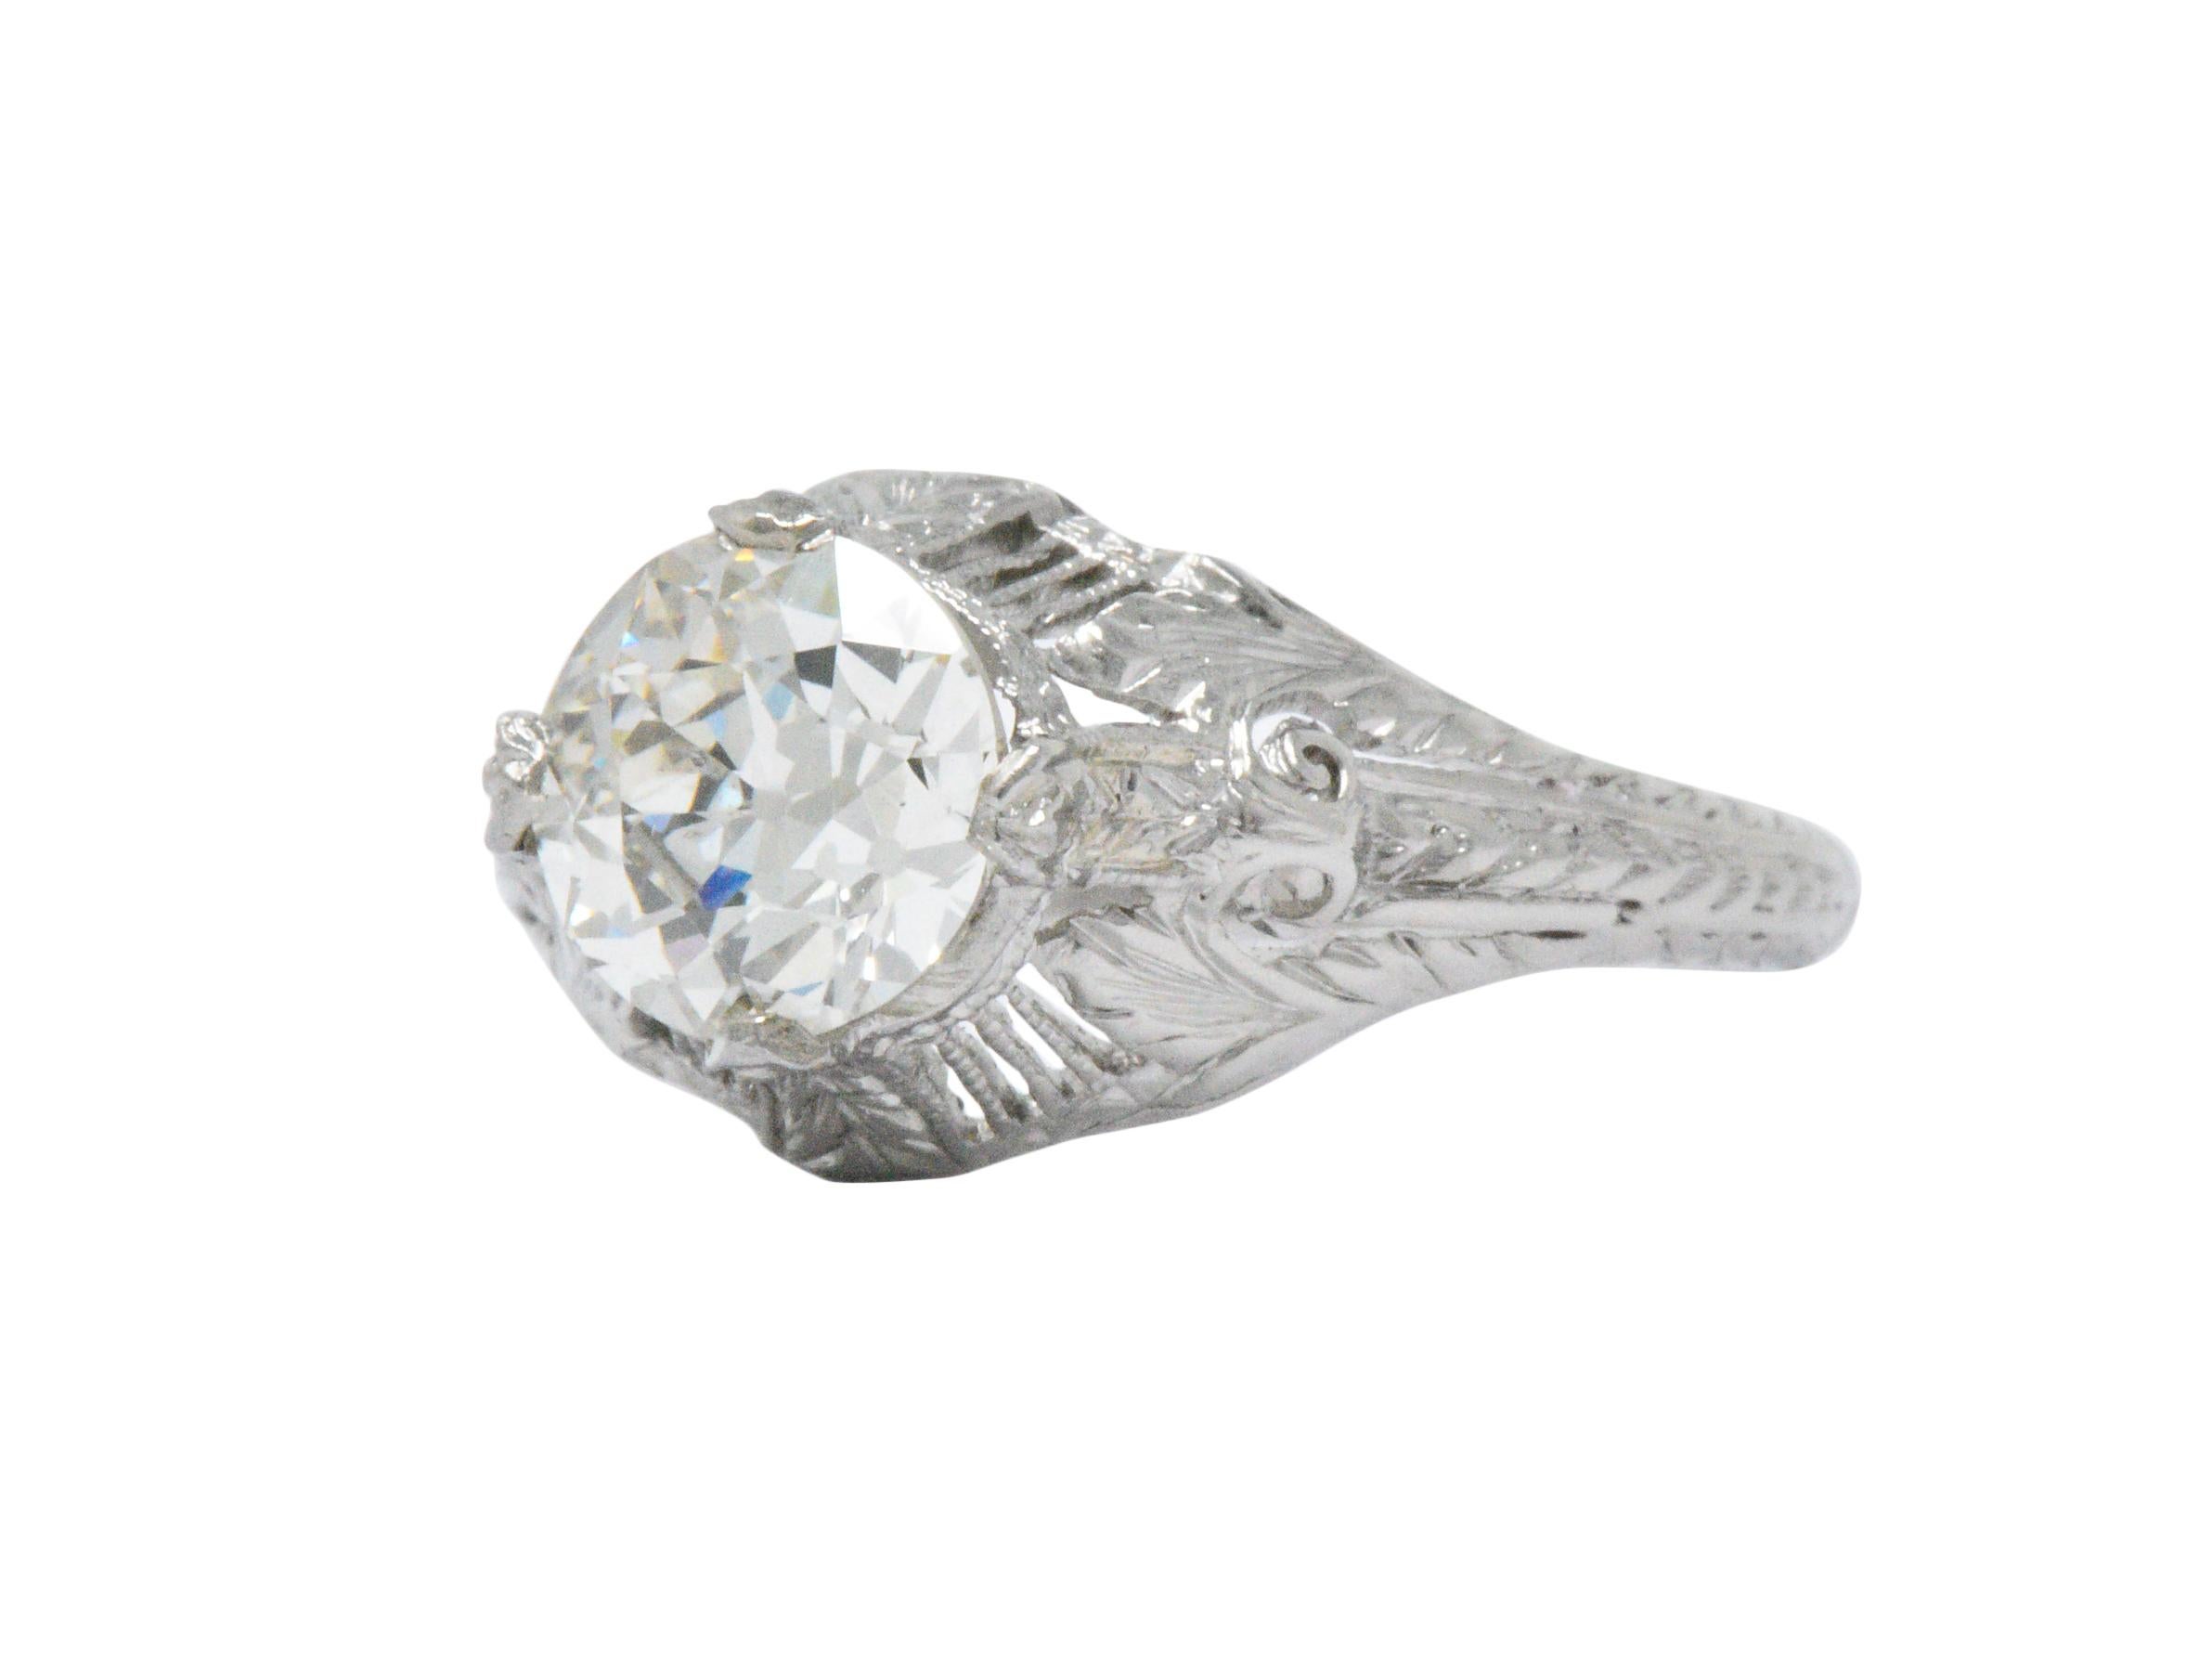 Centering an old European cut diamond weighing 1.25 carats, K color and SI1 clarity, accompanied by GIA Diamond Grading Report

Pierced millegrain and hand engraved platinum mount

Appealing North, East, South, West setting

Signed 